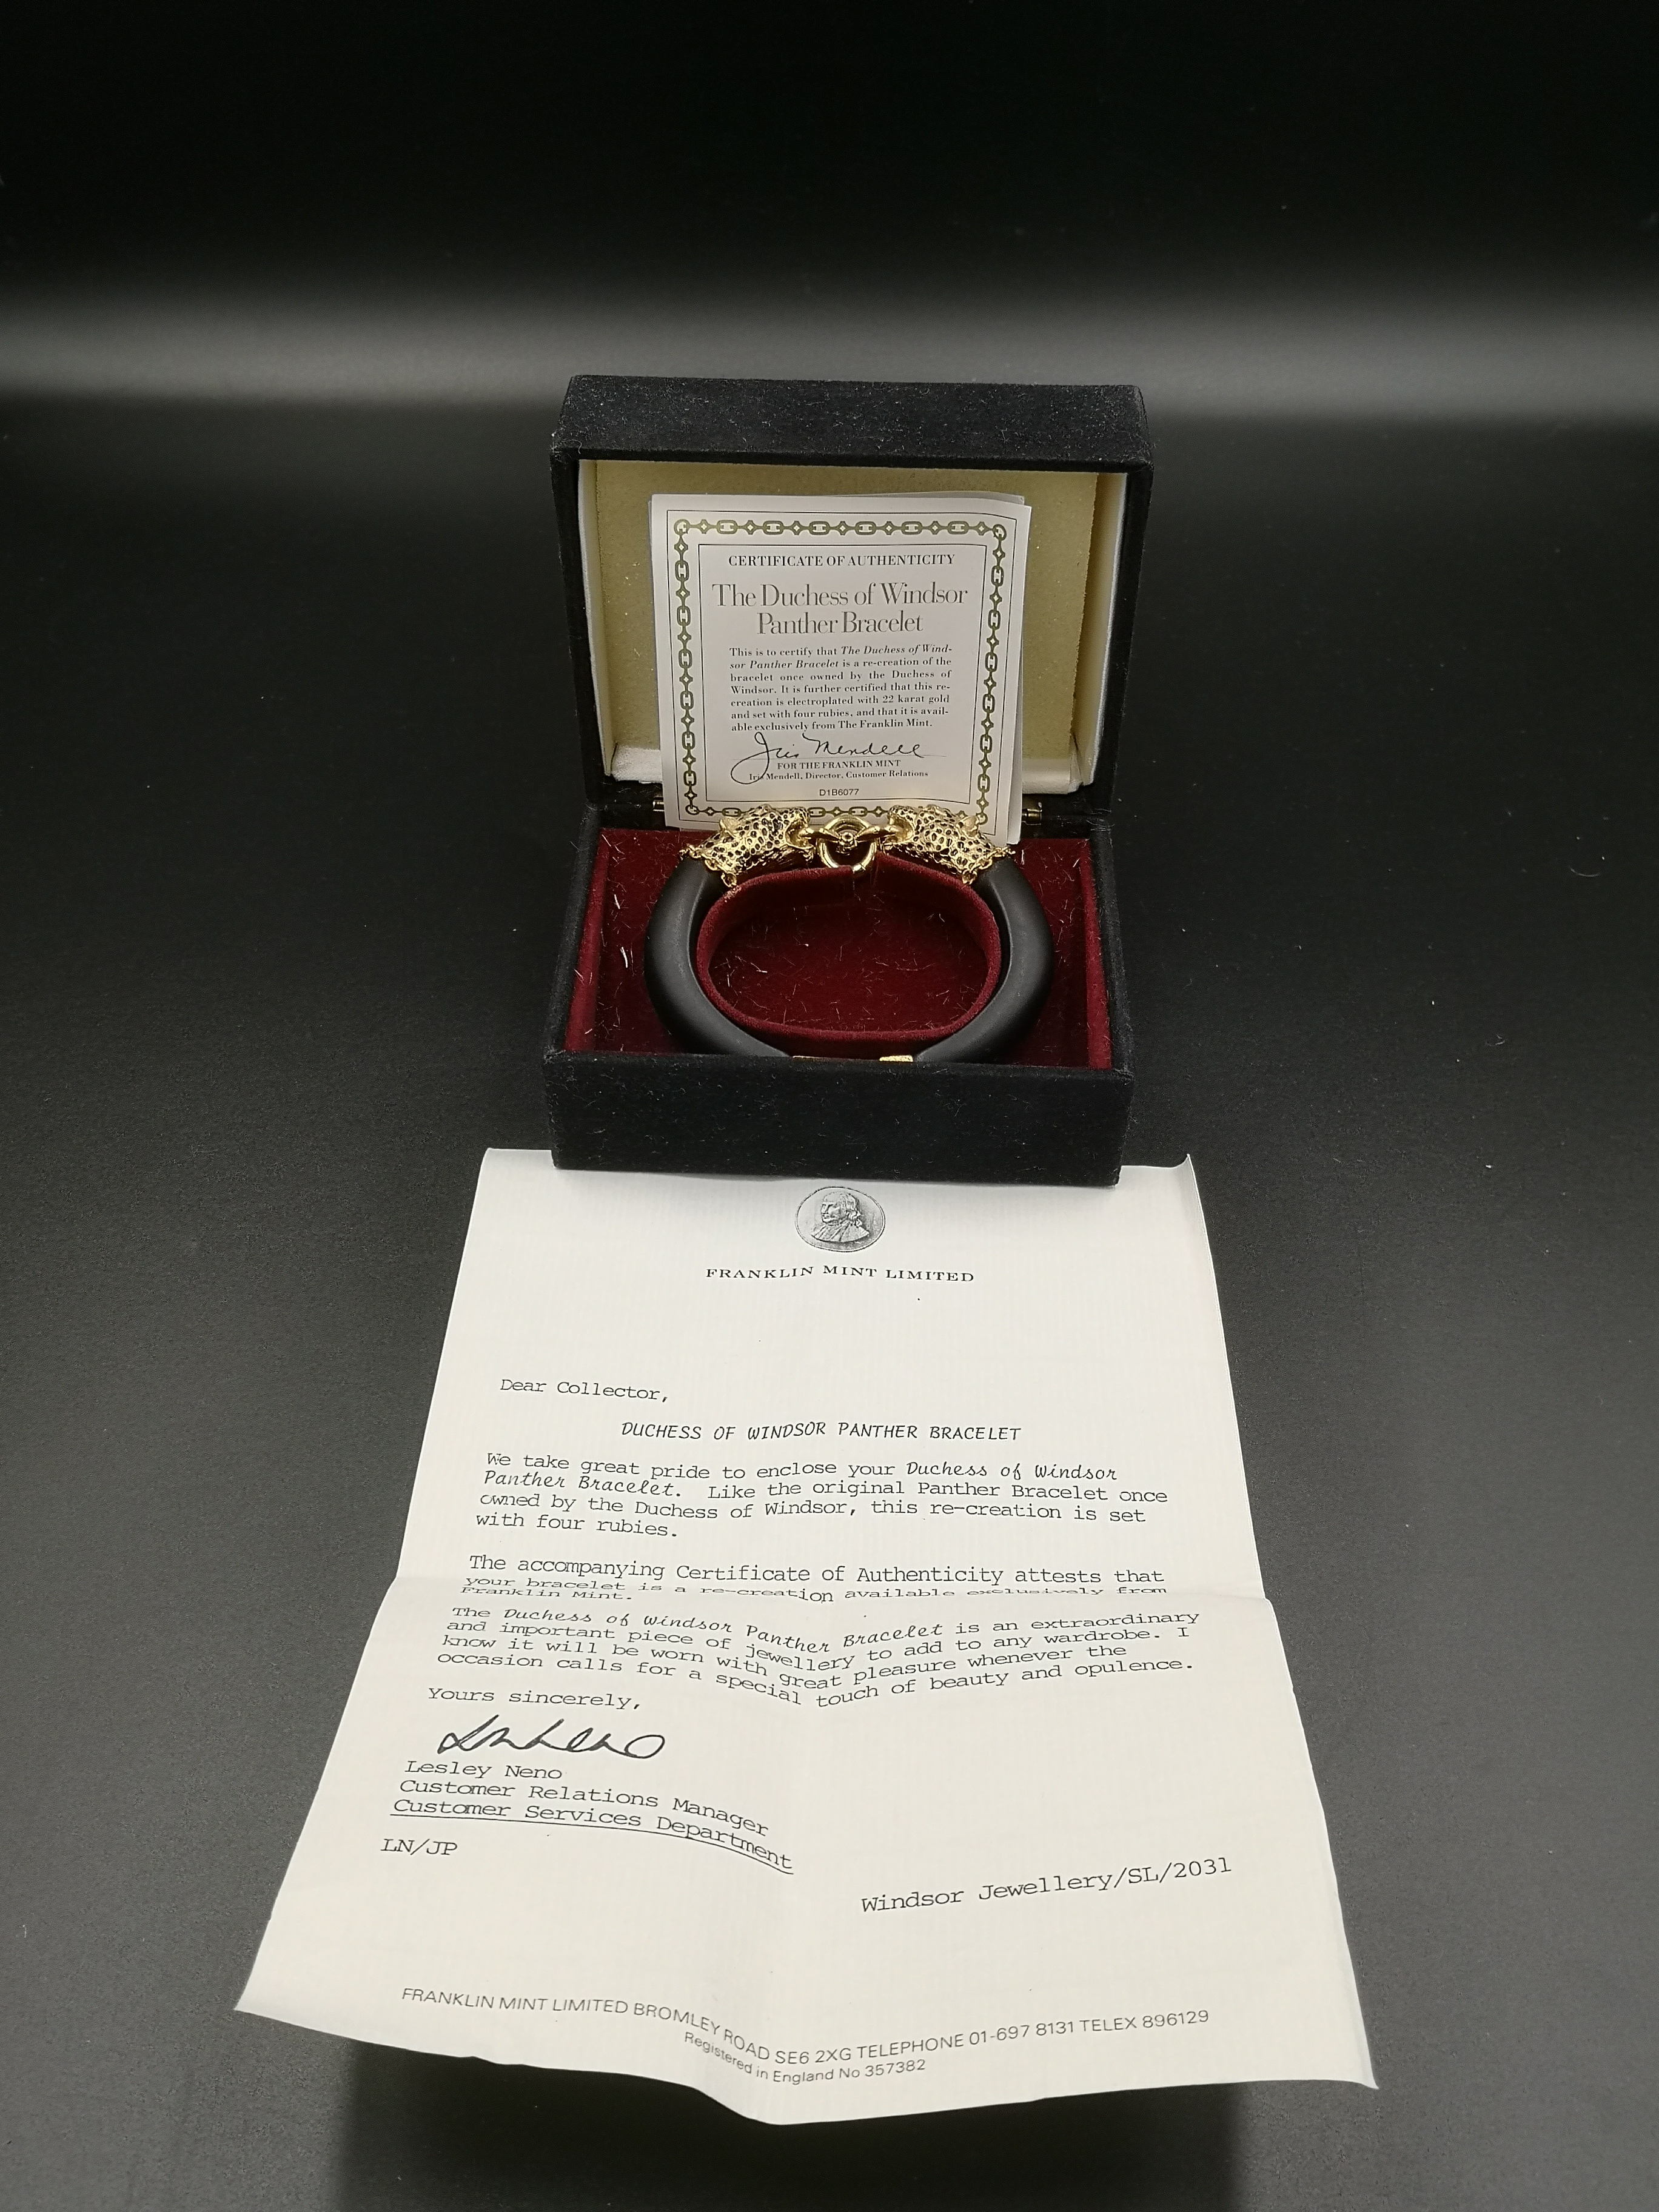 Franklin Mint Duchess of Windsor panther bracelet with certificate of authenticity. - Image 5 of 5